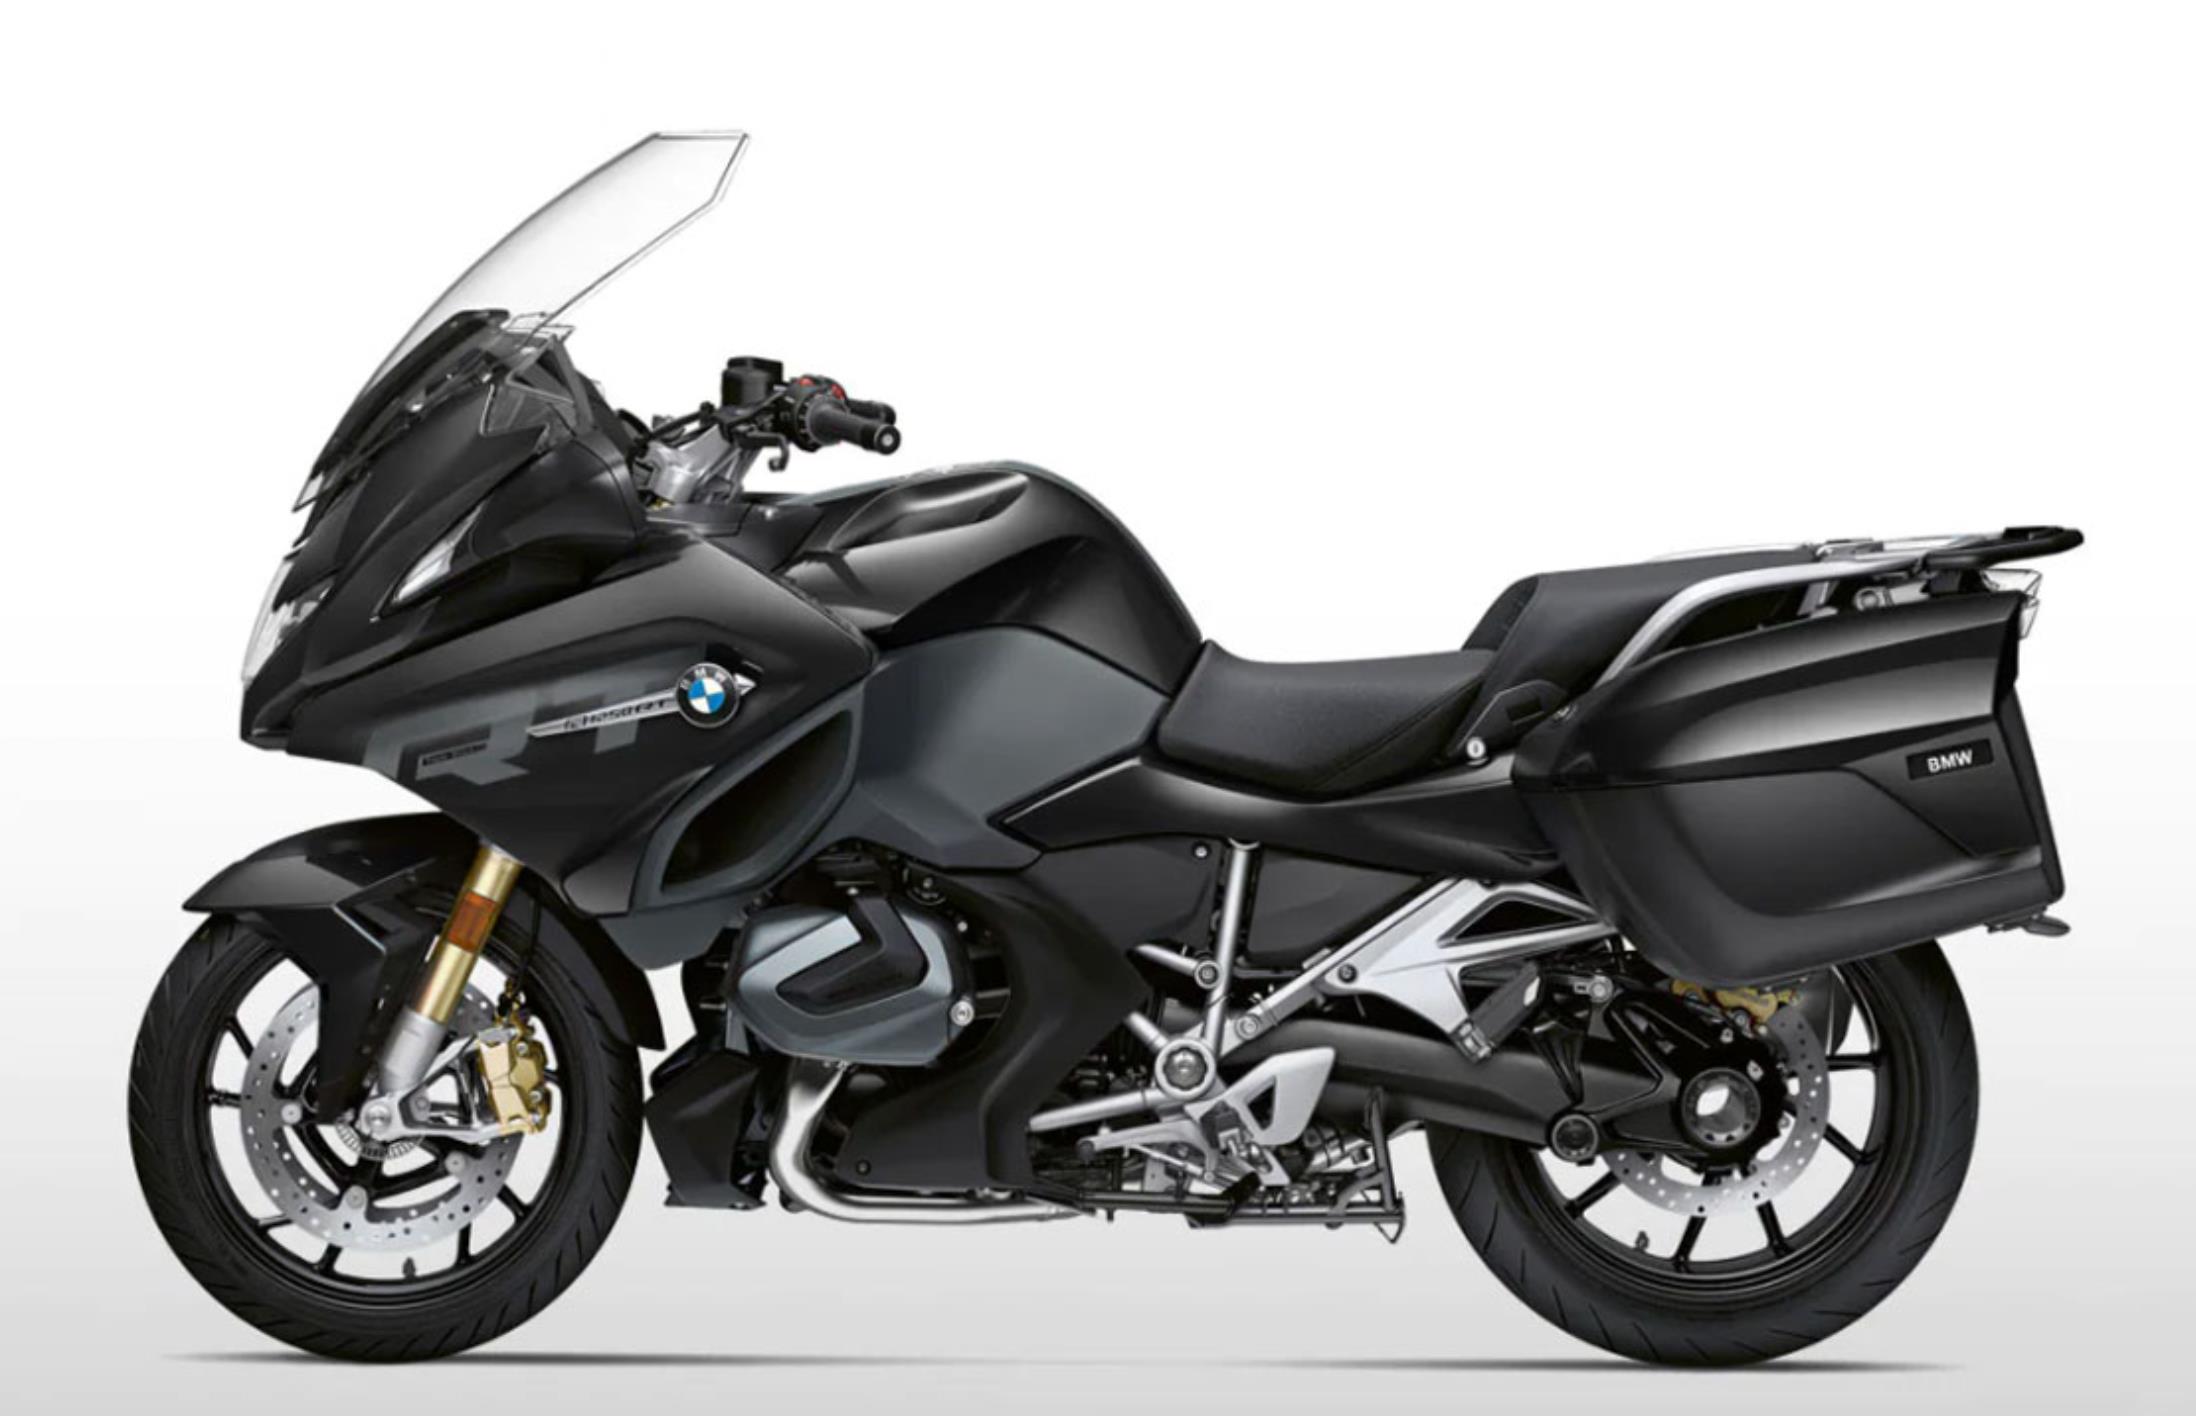 BMW R1250RT Price, Specs, Top Speed & Mileage in India